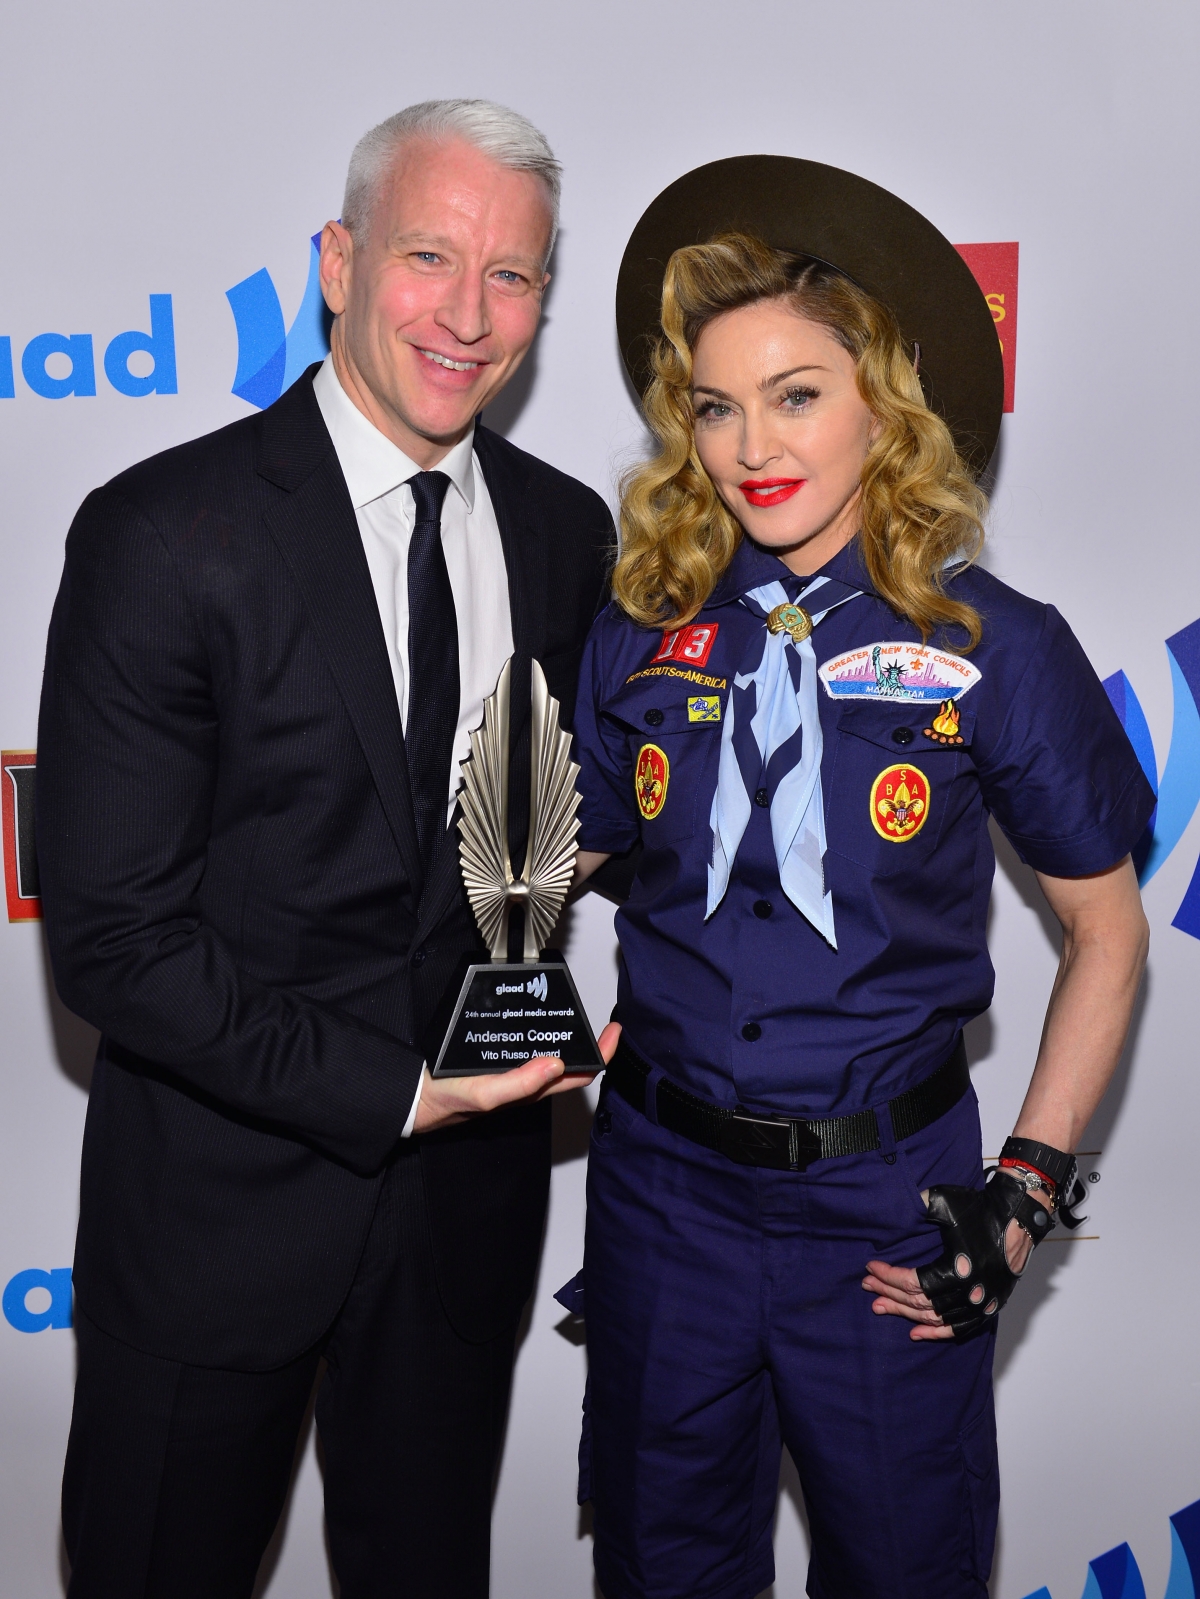 Madonn with Anderson Cooper